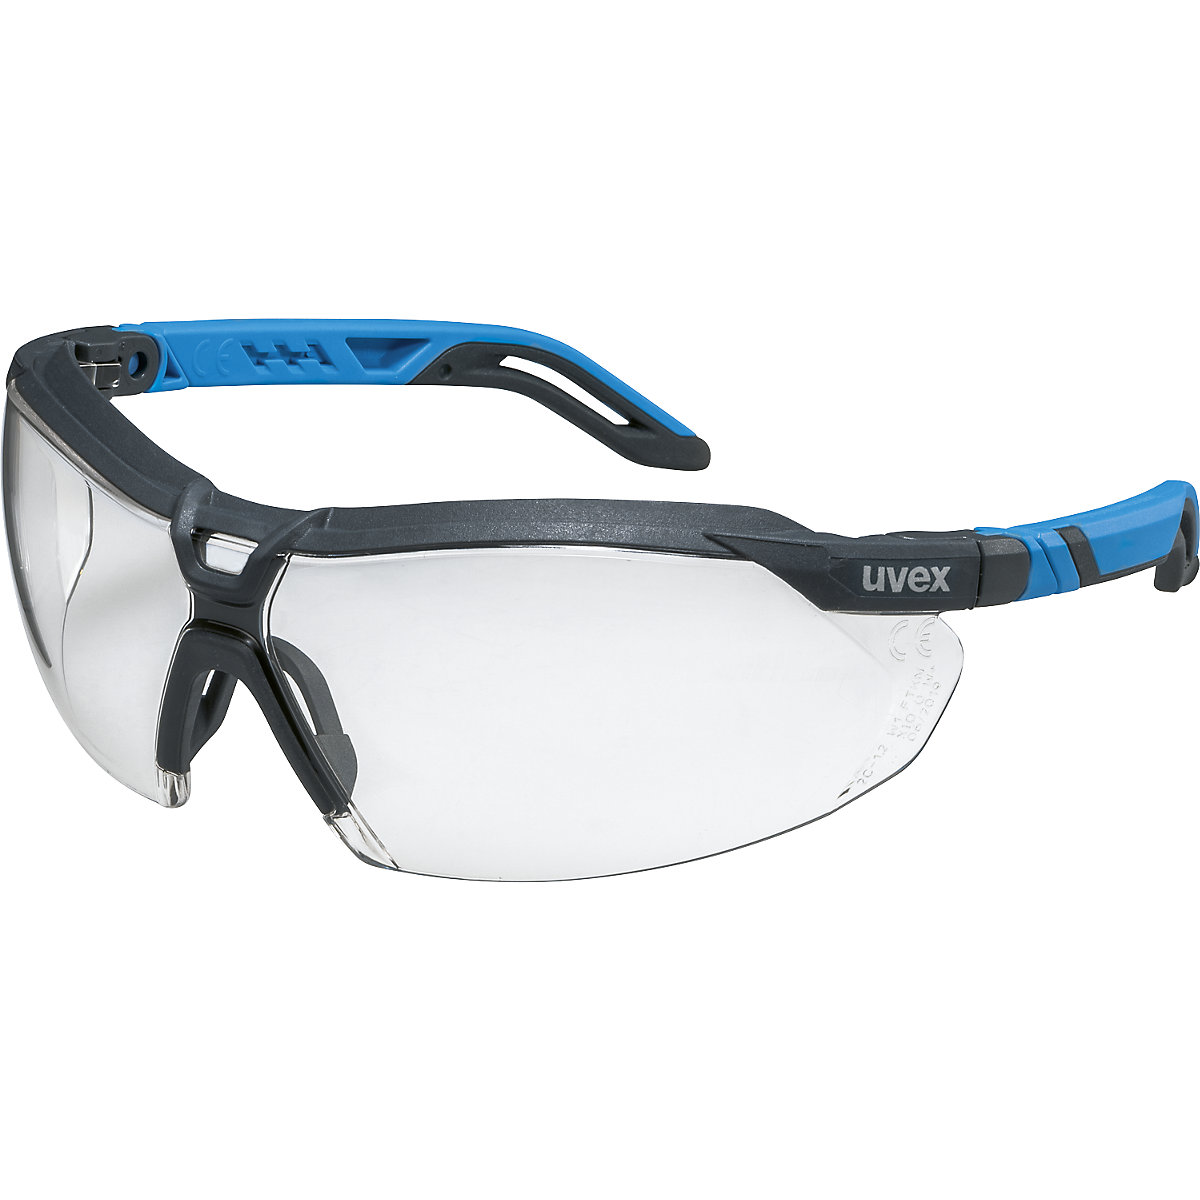 i-Series safety spectacles – Uvex